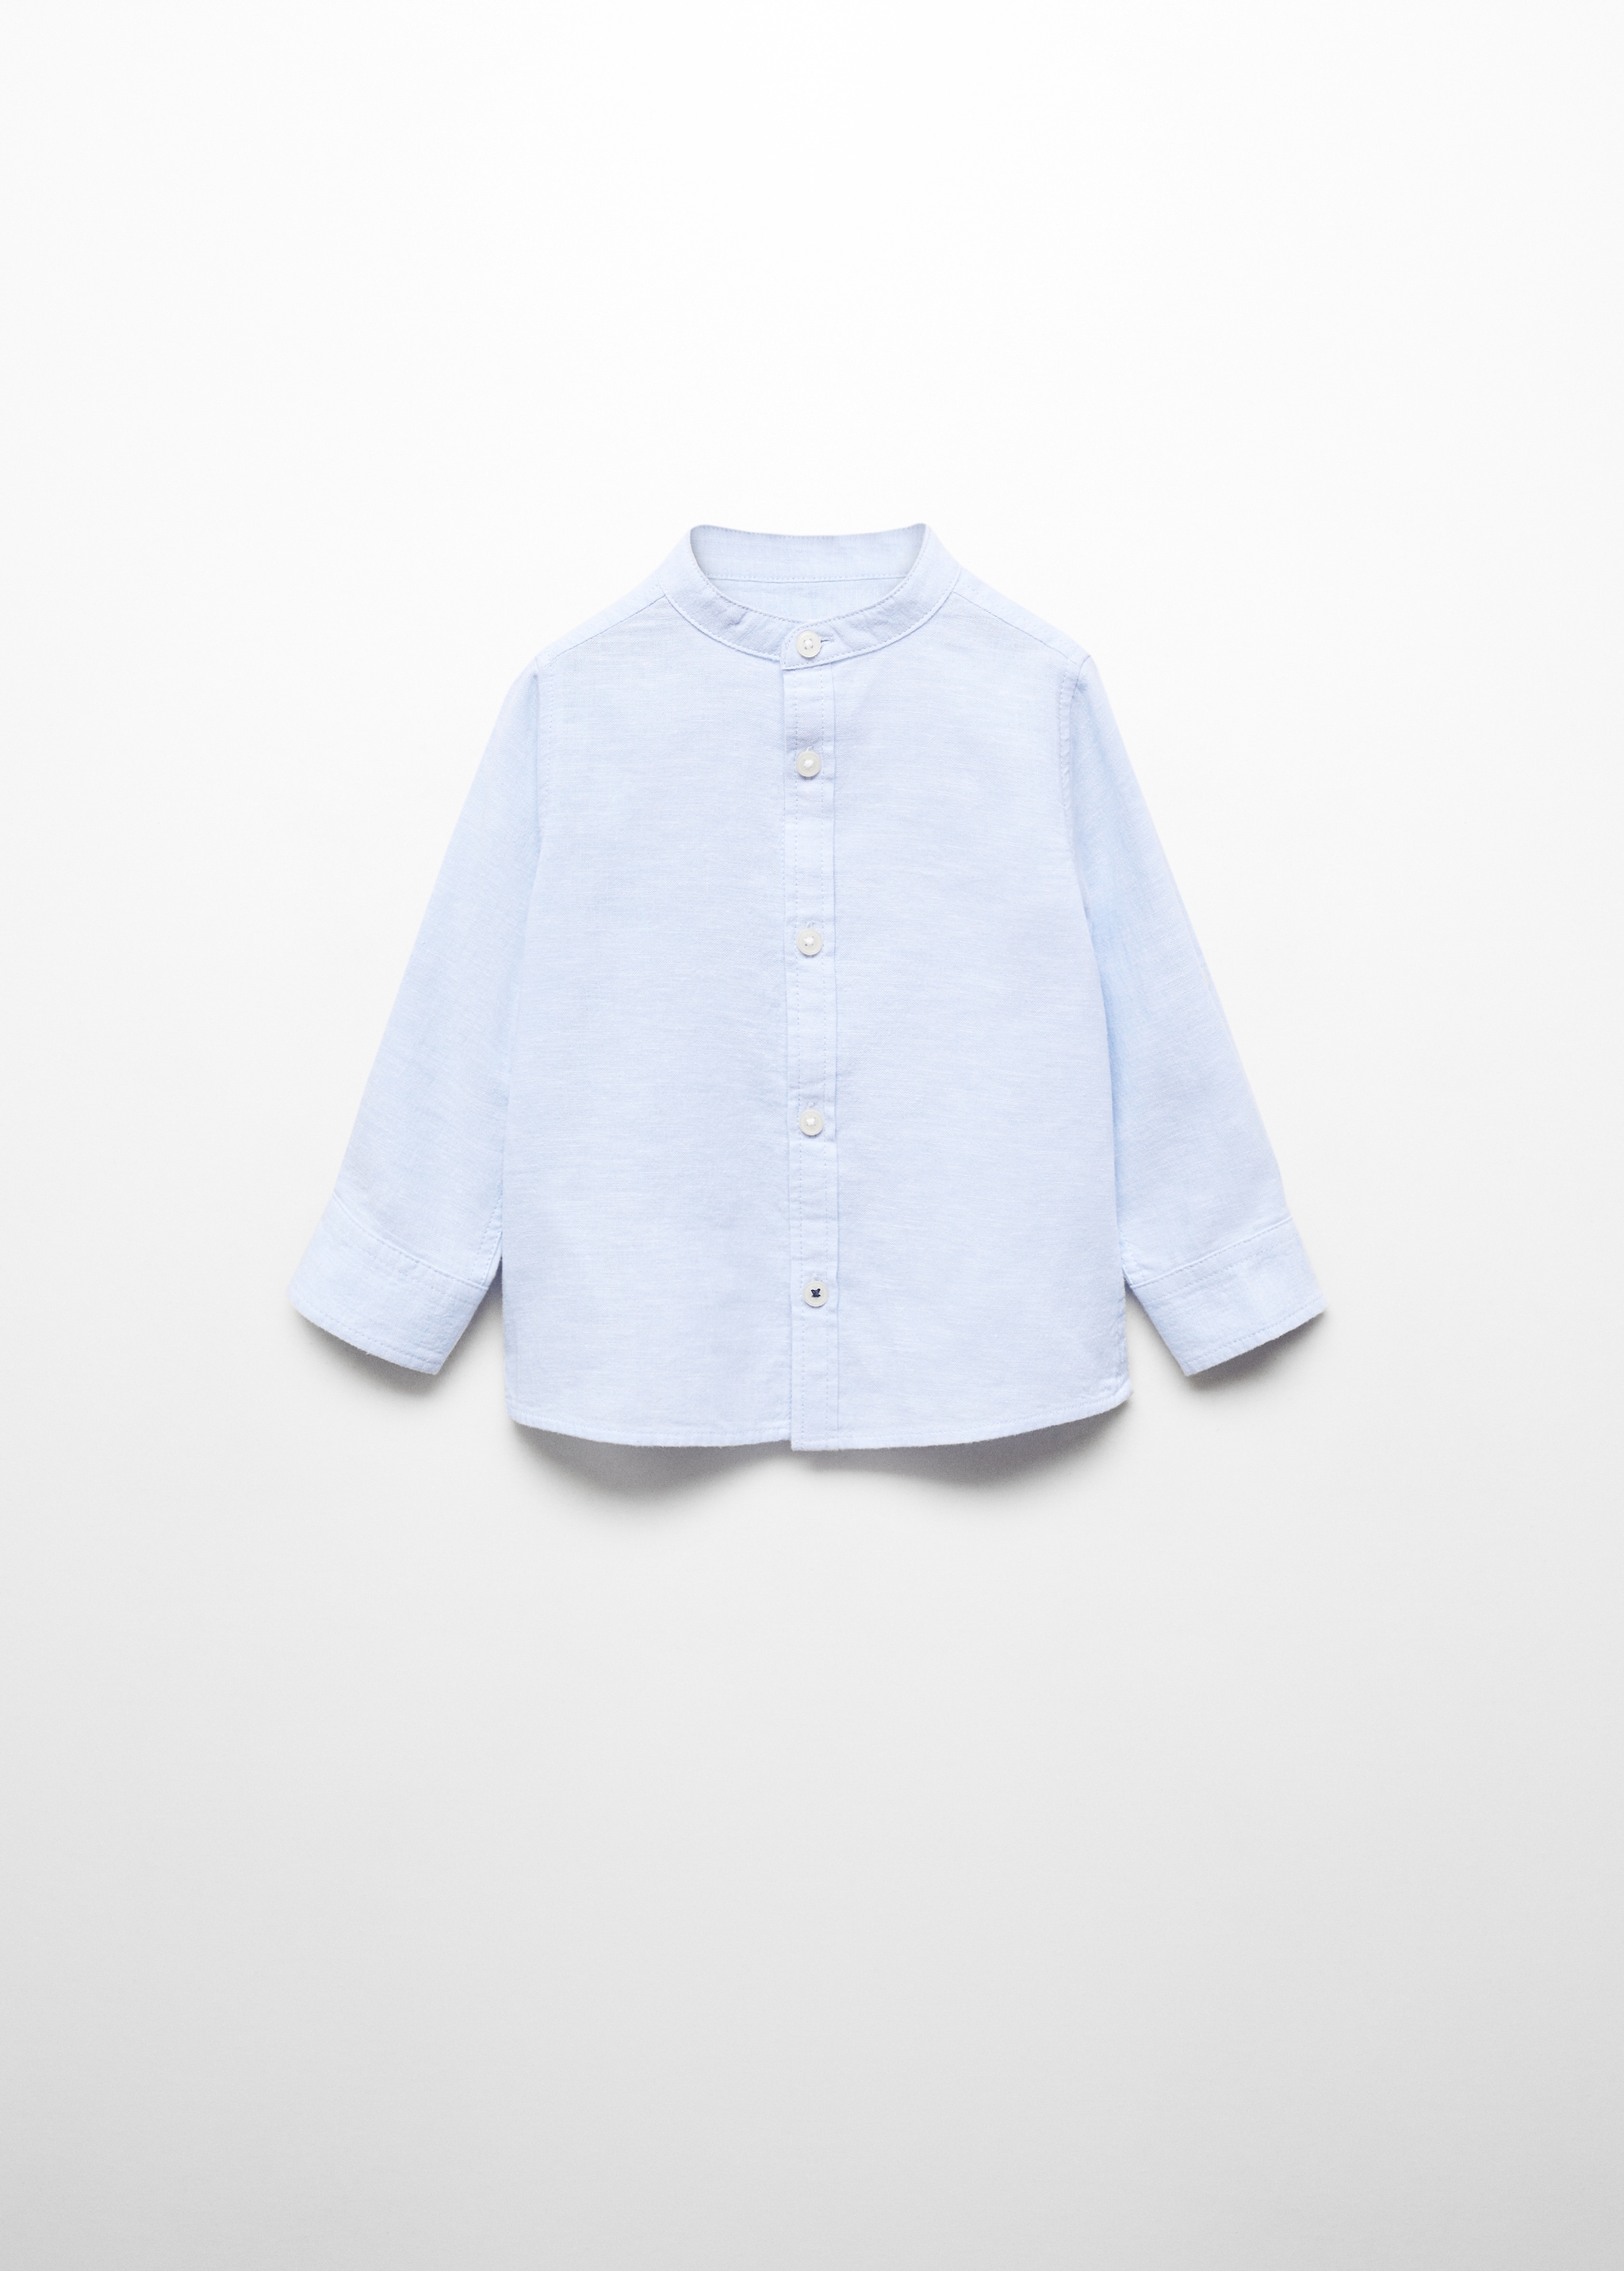 Mao collar linen shirt - Article without model